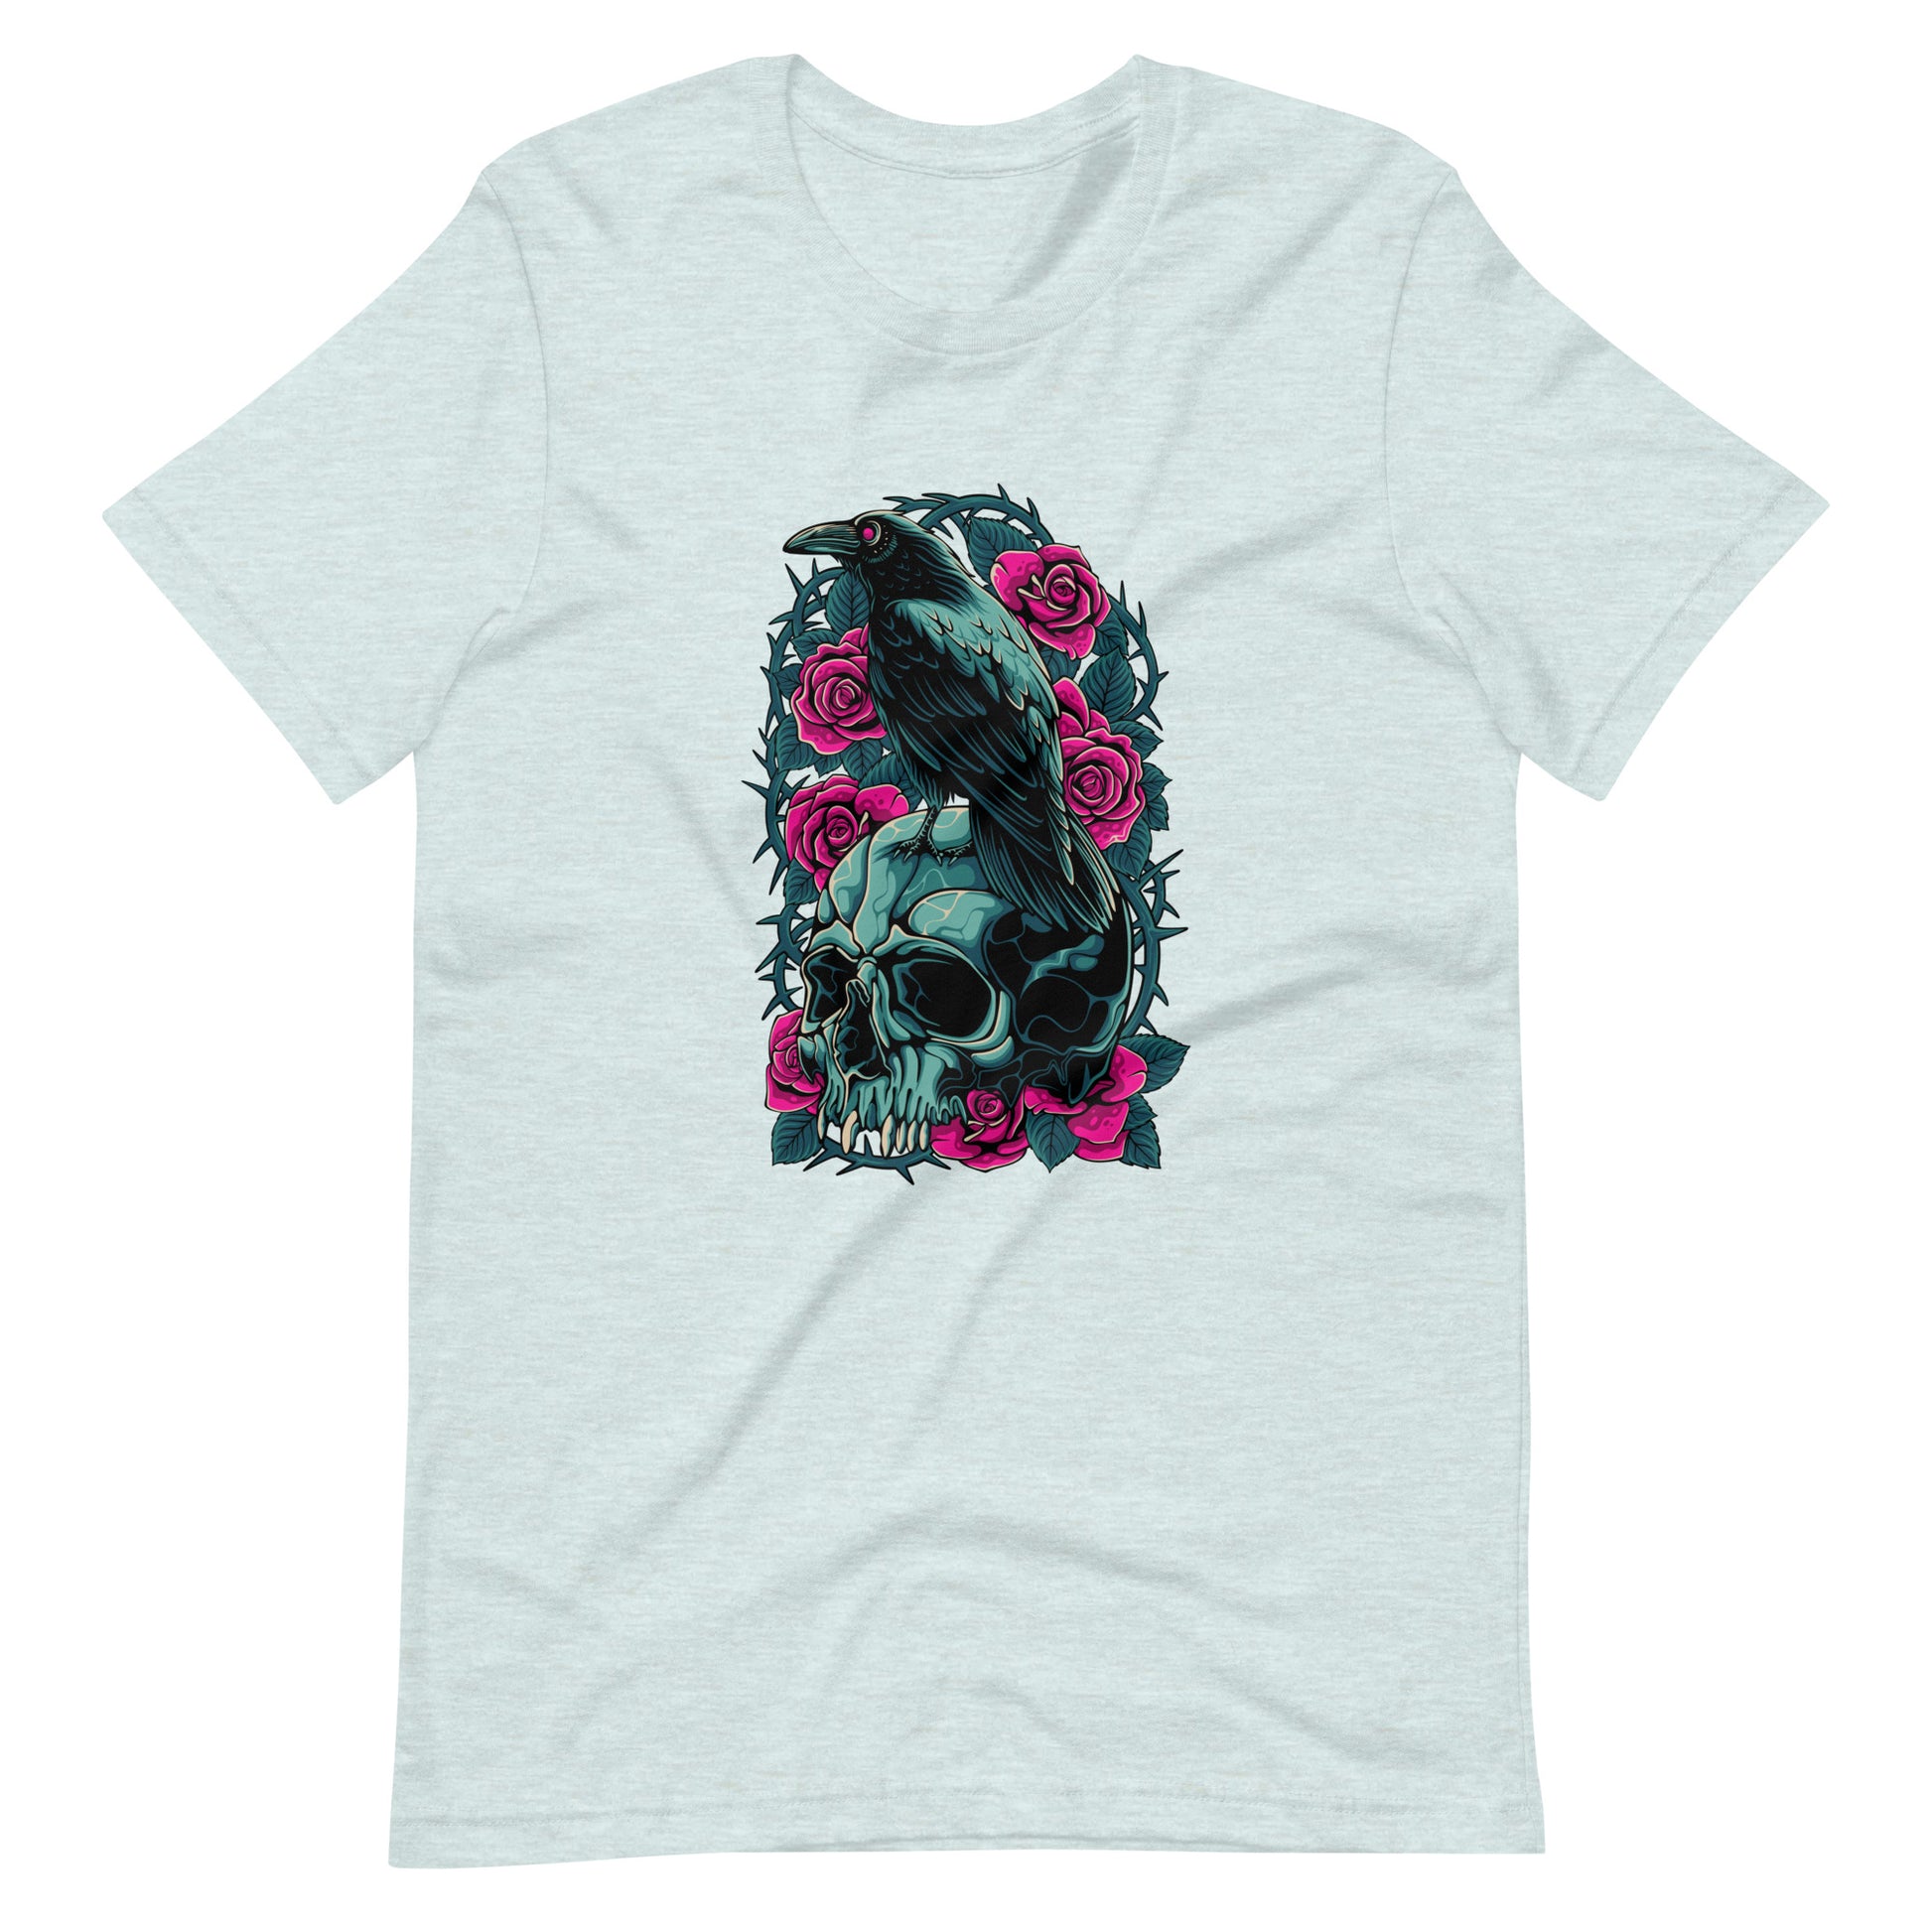 The Raven's Crypt Raven on Skull - Men's t-shirt Heather Prism Ice Blue Front